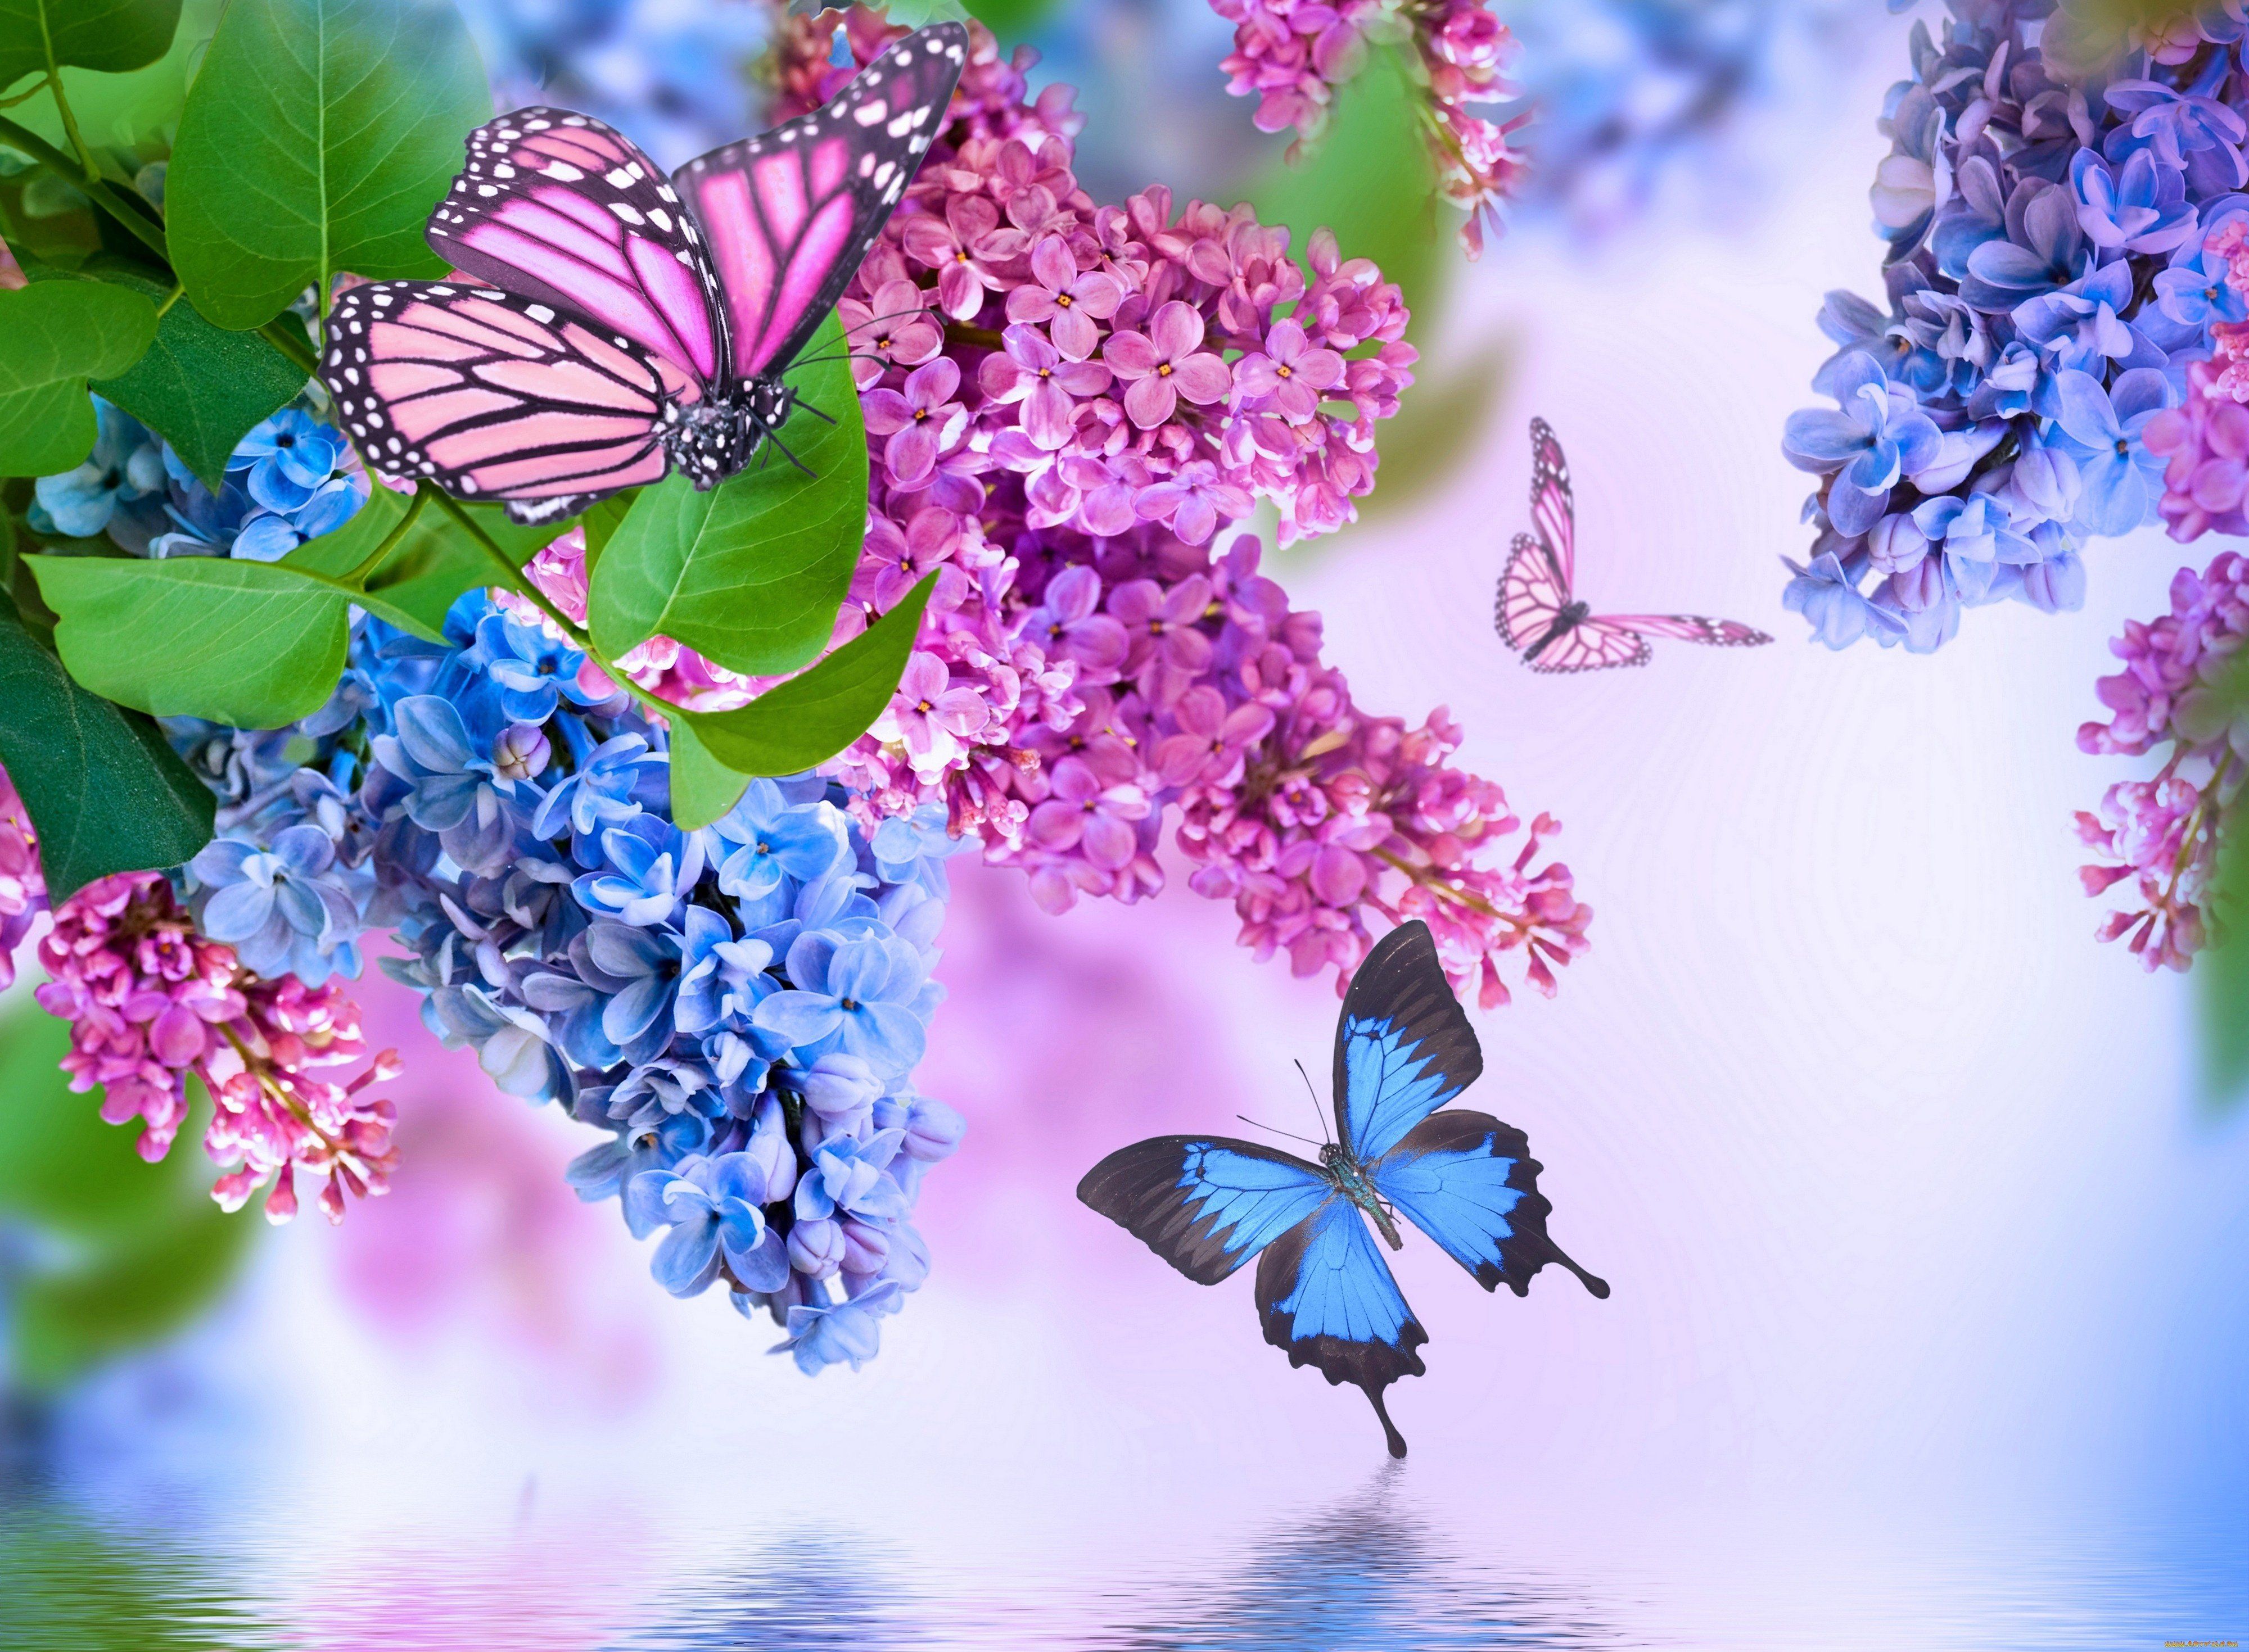 Flower Bouquet White And Pink Roses And Flying Butterflies Hd Wallpaper  Download For Mobile And Tablet 3840х2400  Wallpapers13com